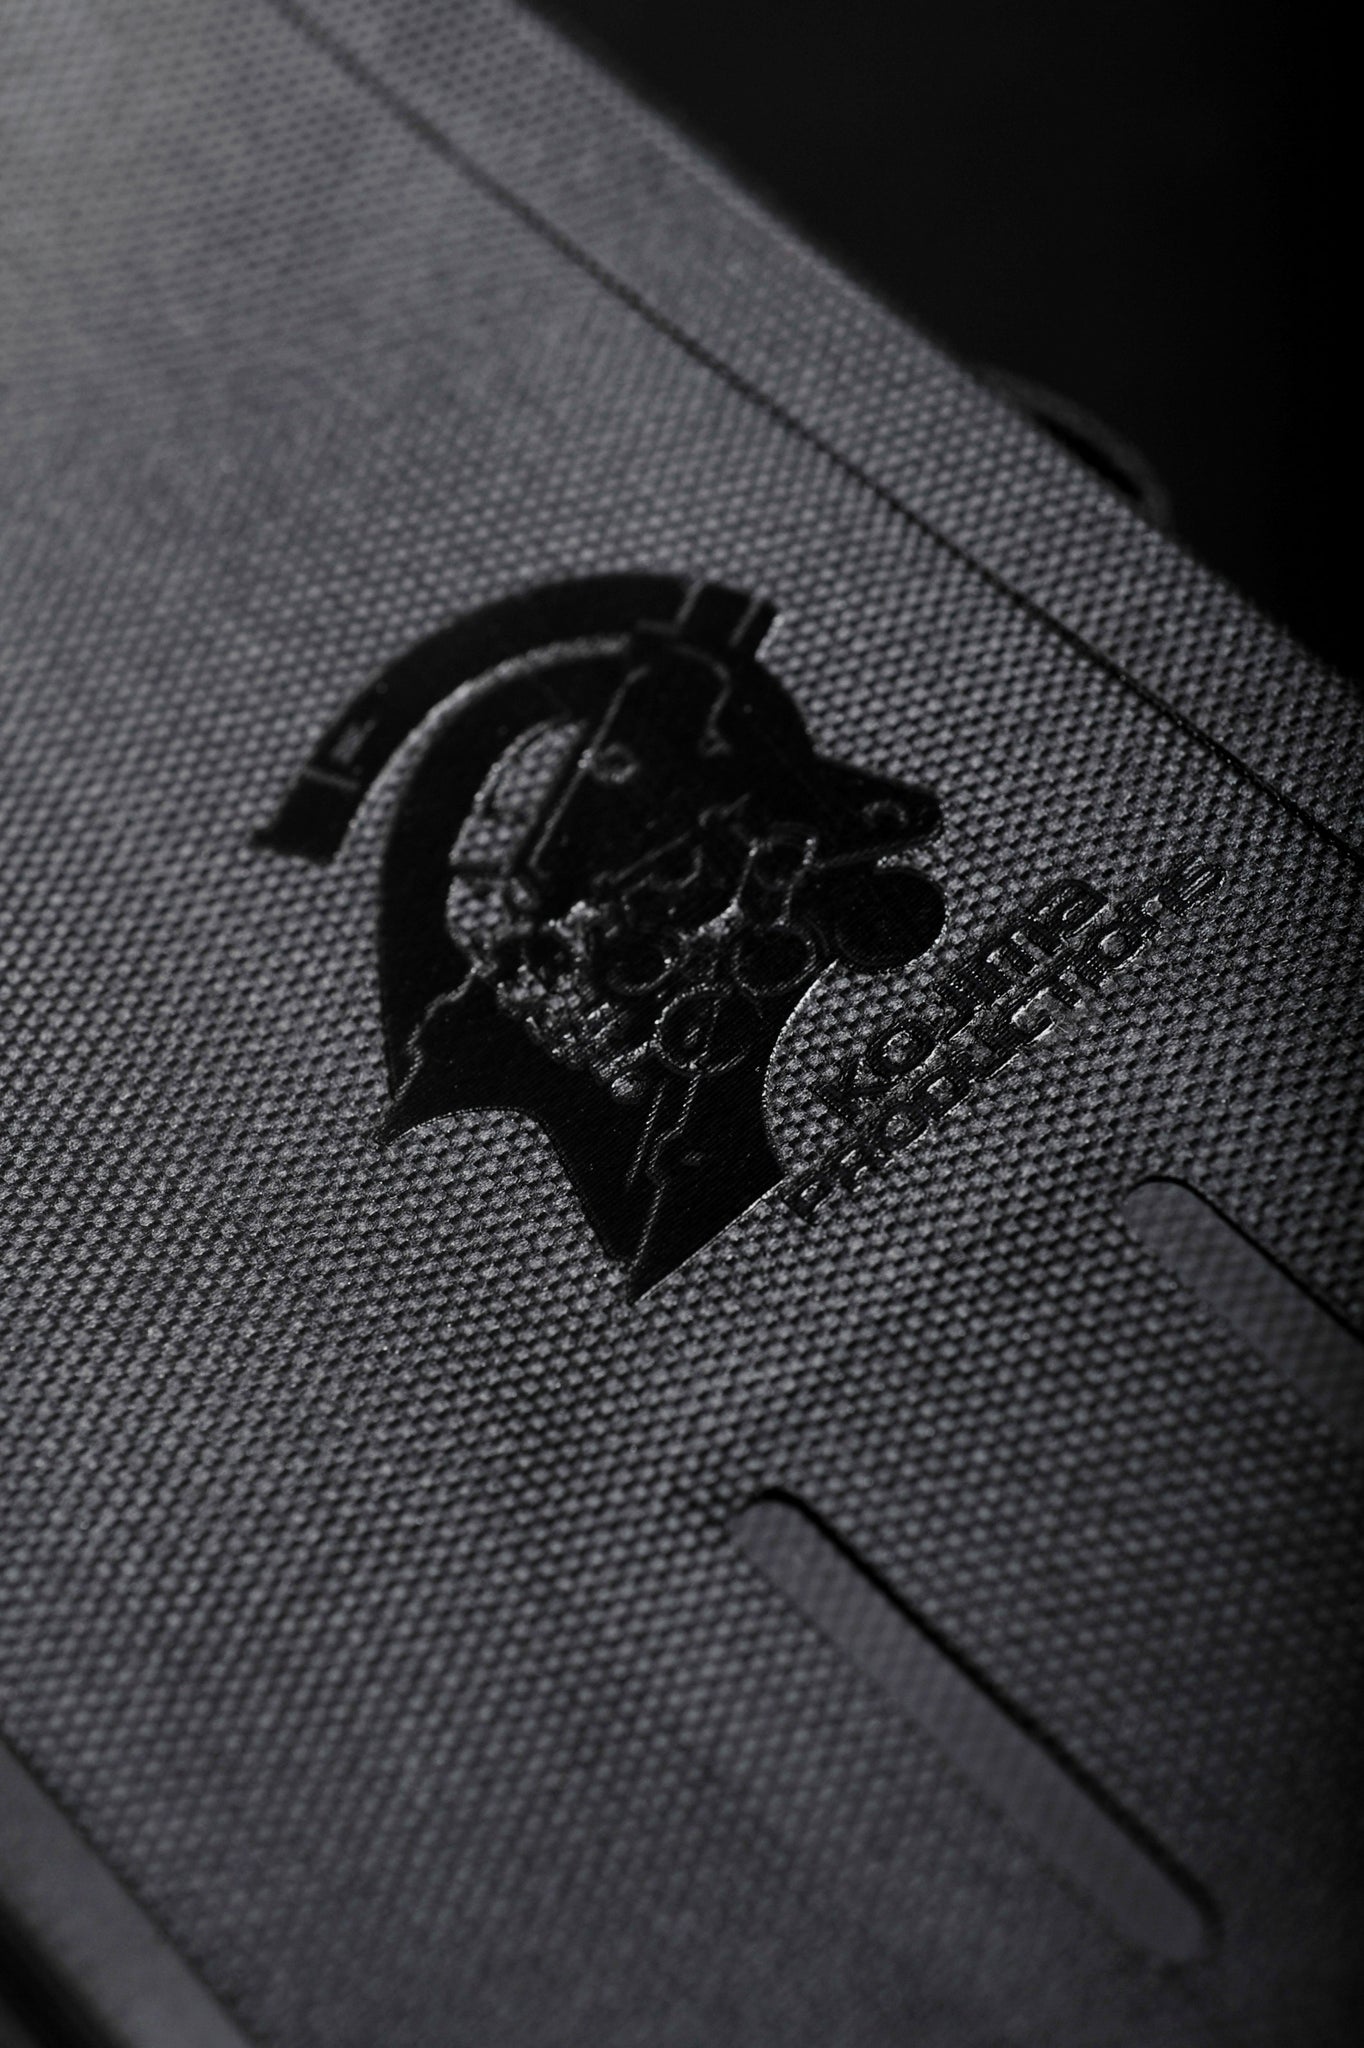 Inspired by the Ludens carrier, ANICORN partners with outdoor gear design company Syzygy for a featured seamless Ludens Sacoche. It is a fashionable accessory for everyday uses. Ludens Sacoche has KOJIMA PRODUCTIONS logo subtly printed on the front; it is made with TPU material, which is lightweight, waterproof, durable and non-toxic.